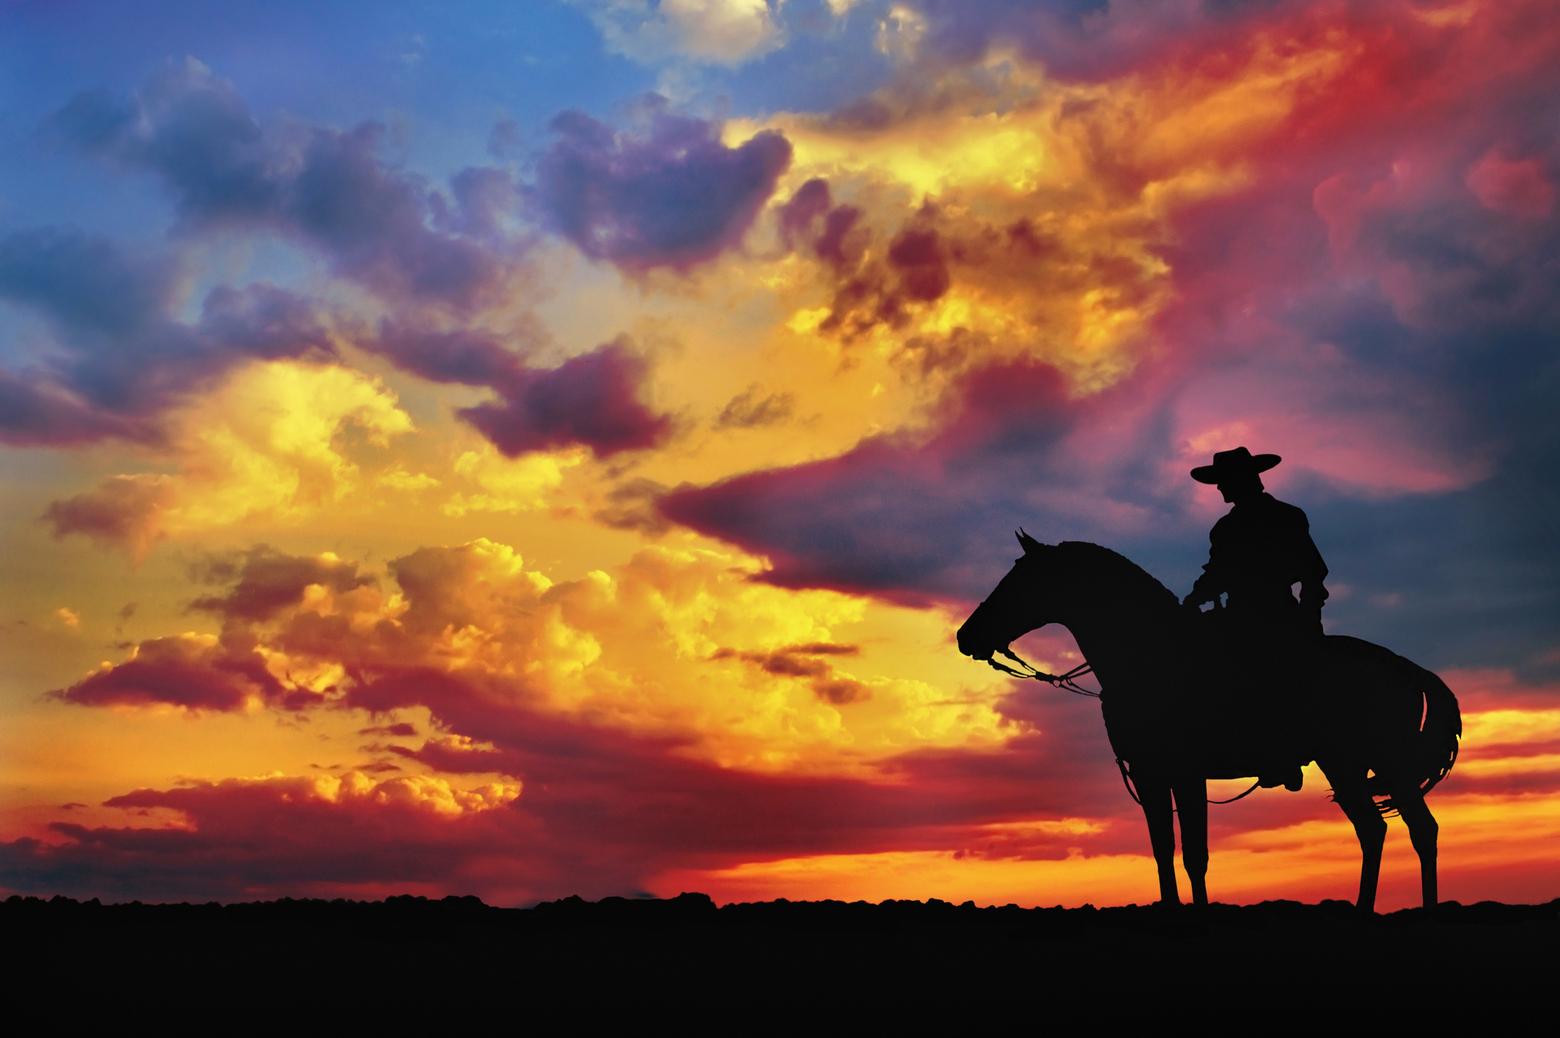 The American West often lionizes the myth of cowboys too tough to feel any pain (physical or emotional).  While the silhouette of a solo rider on the open prairie is romantic, nobody really wants to become a lonesome cowboy, Timothy Tate says. Image licensed through Shutterstock. Not for use elsewhere.